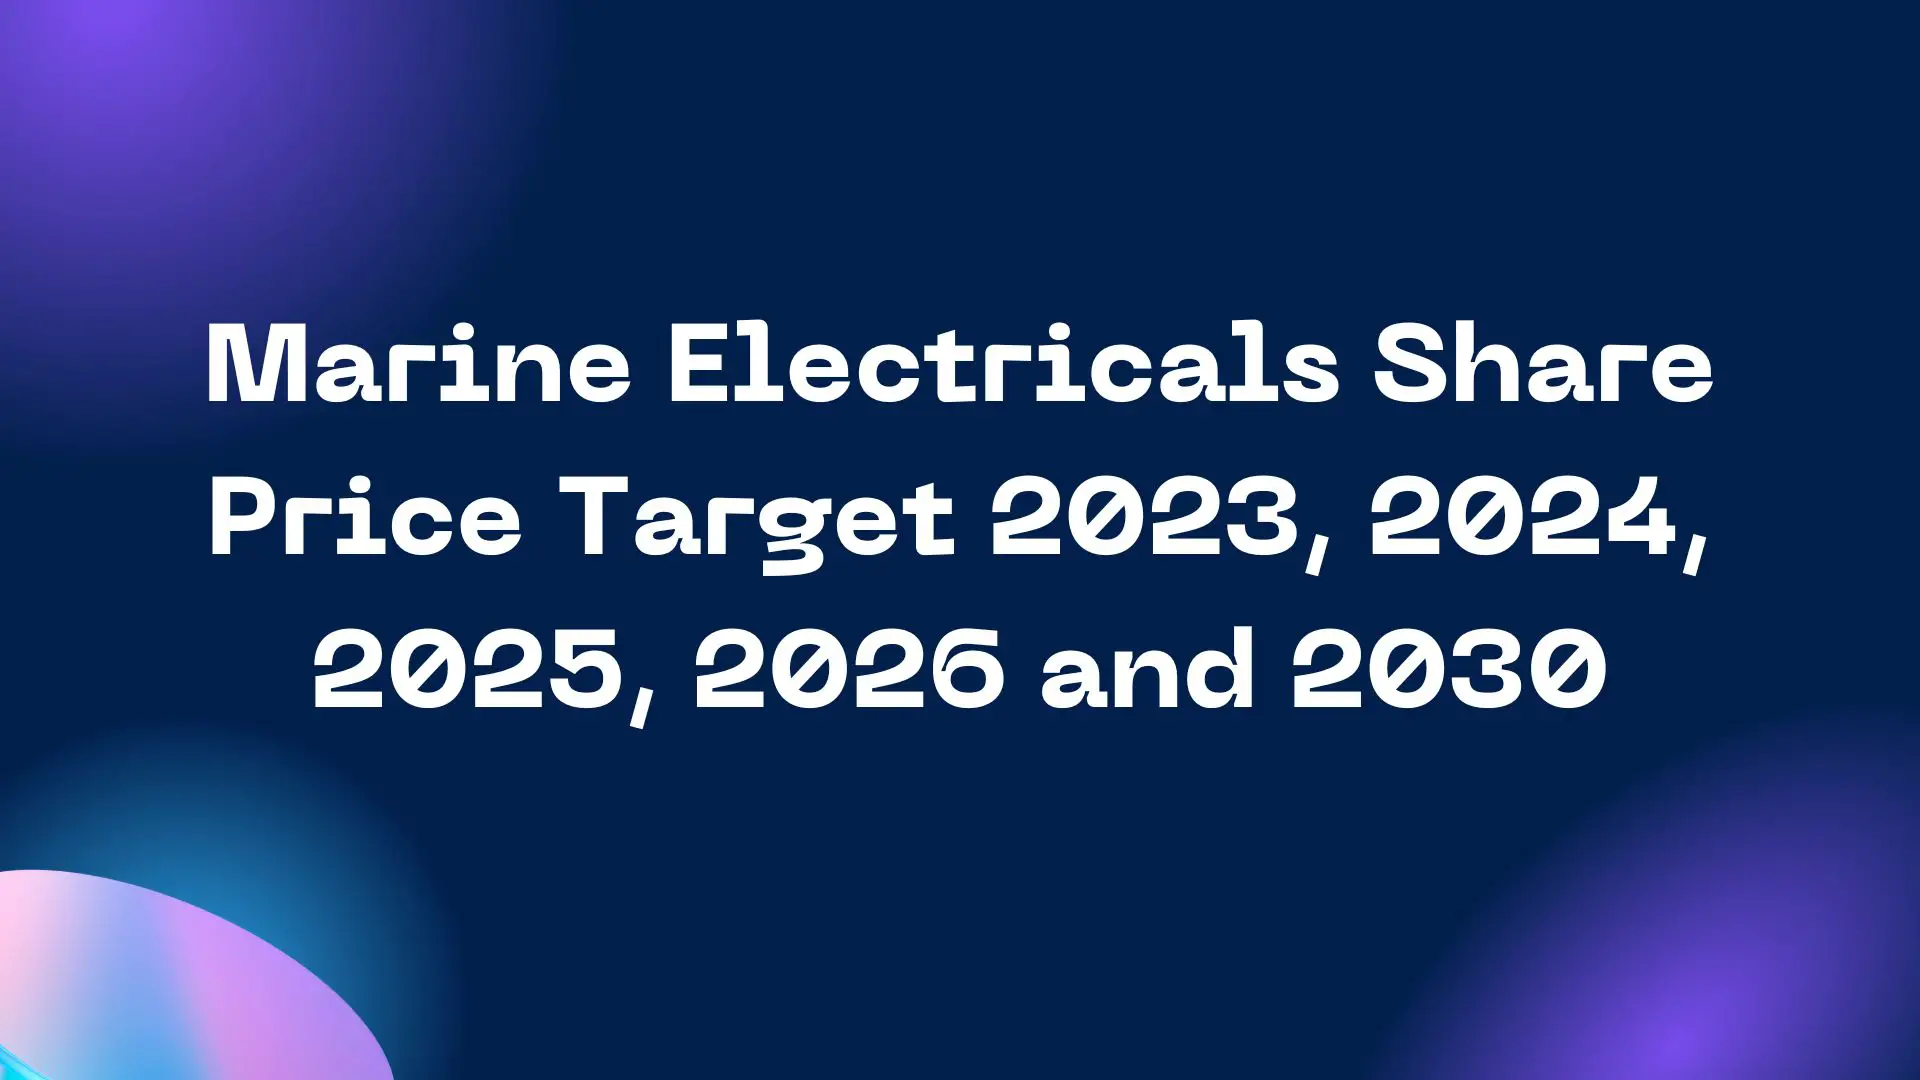 Marine Electricals Share Price Target 2023, 2024, 2025, 2026 and 2030